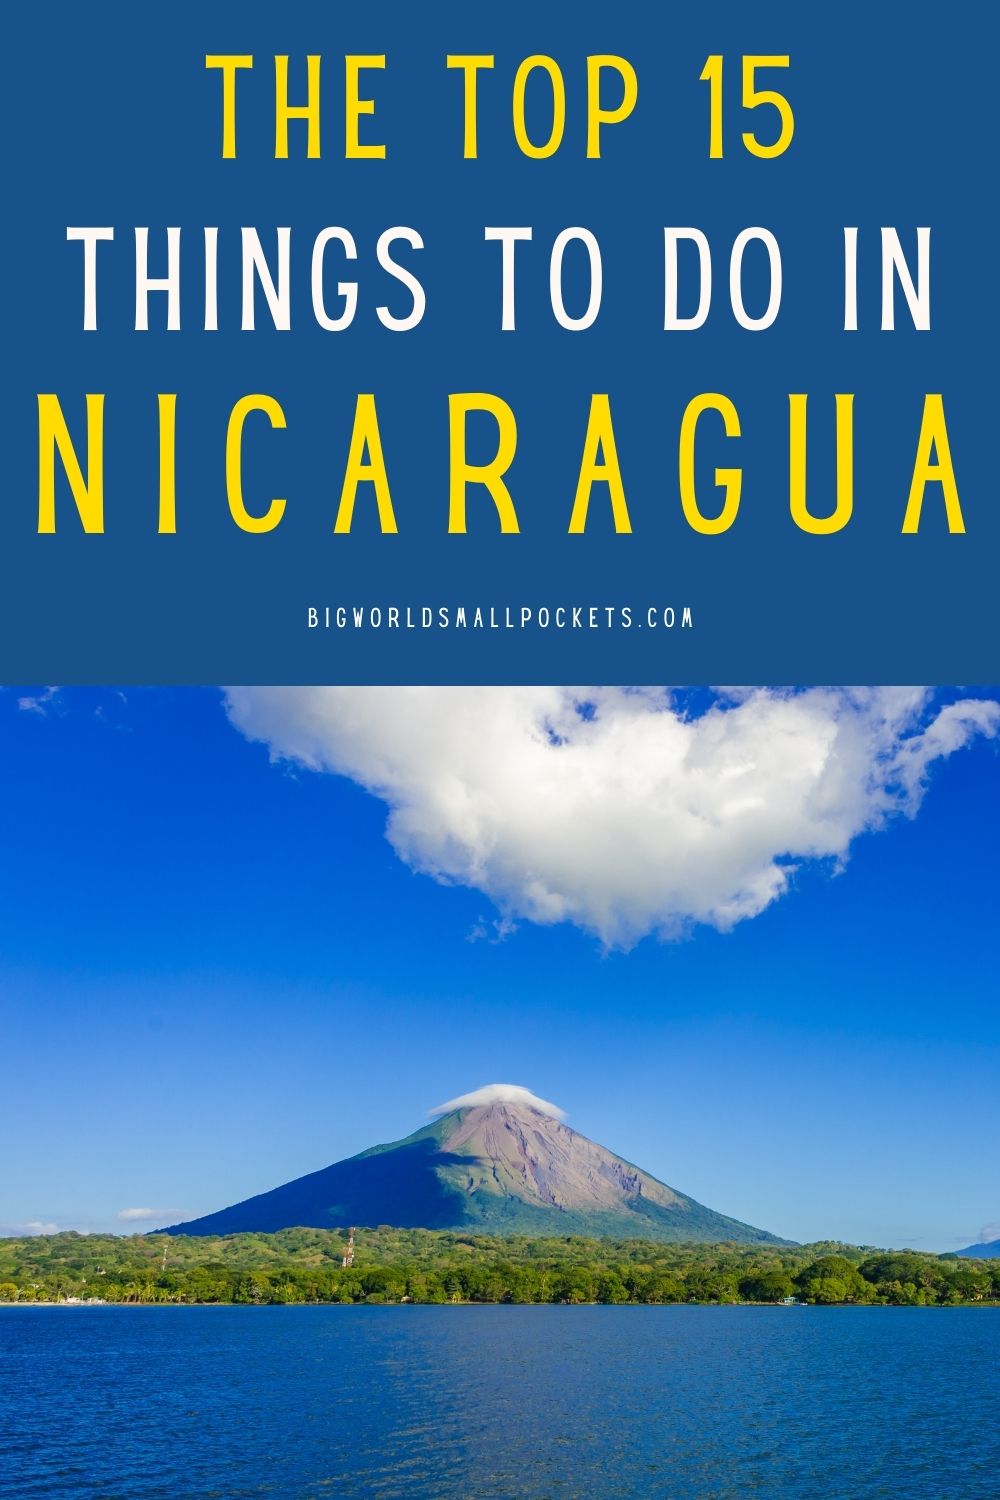 Top 15 Things To Do in Nicaragua